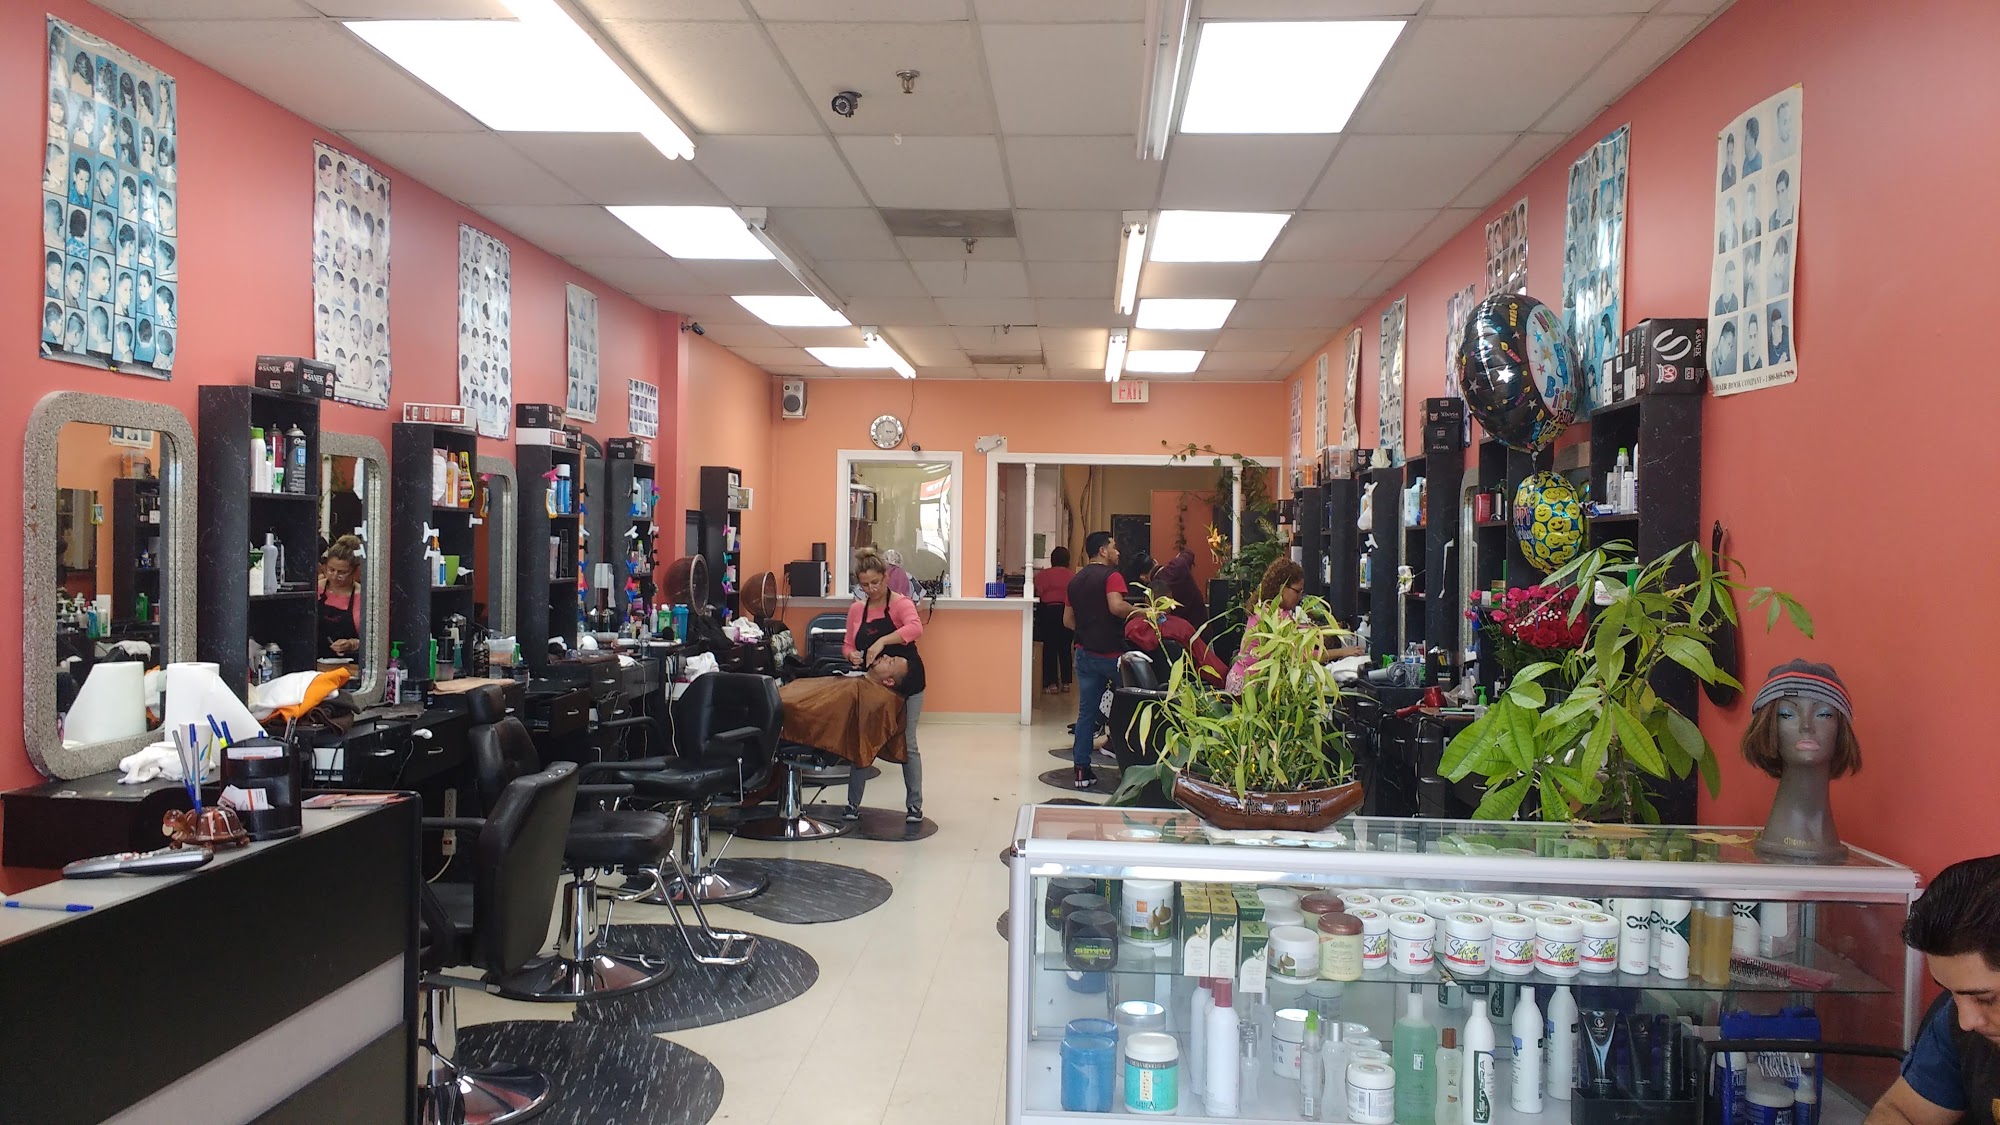 Leticia Stylist Barber Shop